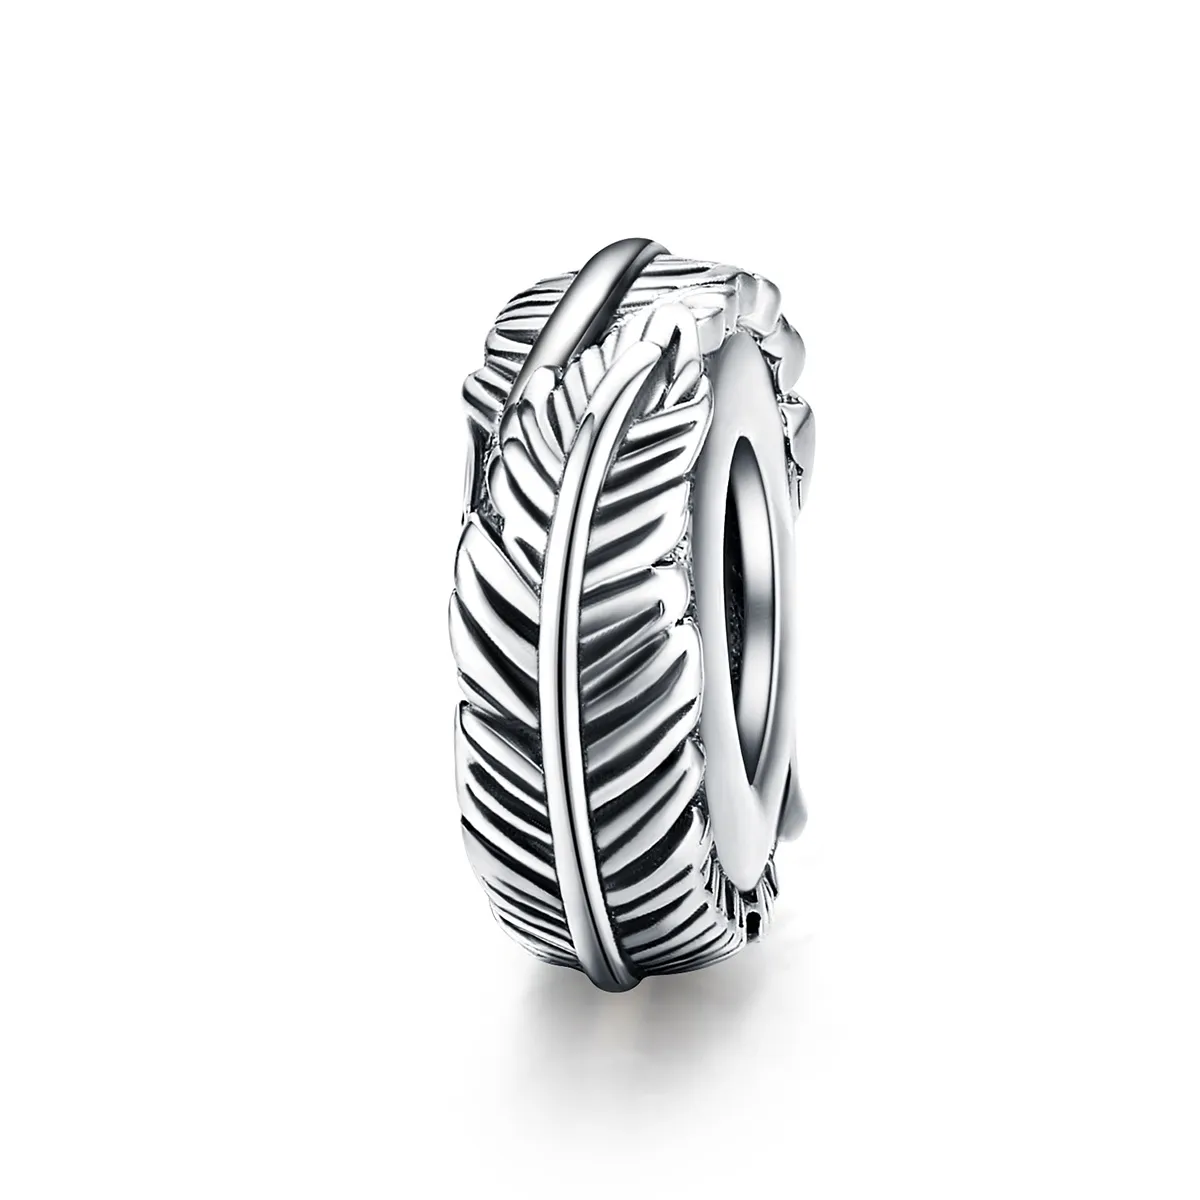 Pandora Style Silver Feather Spacer - SCC1236